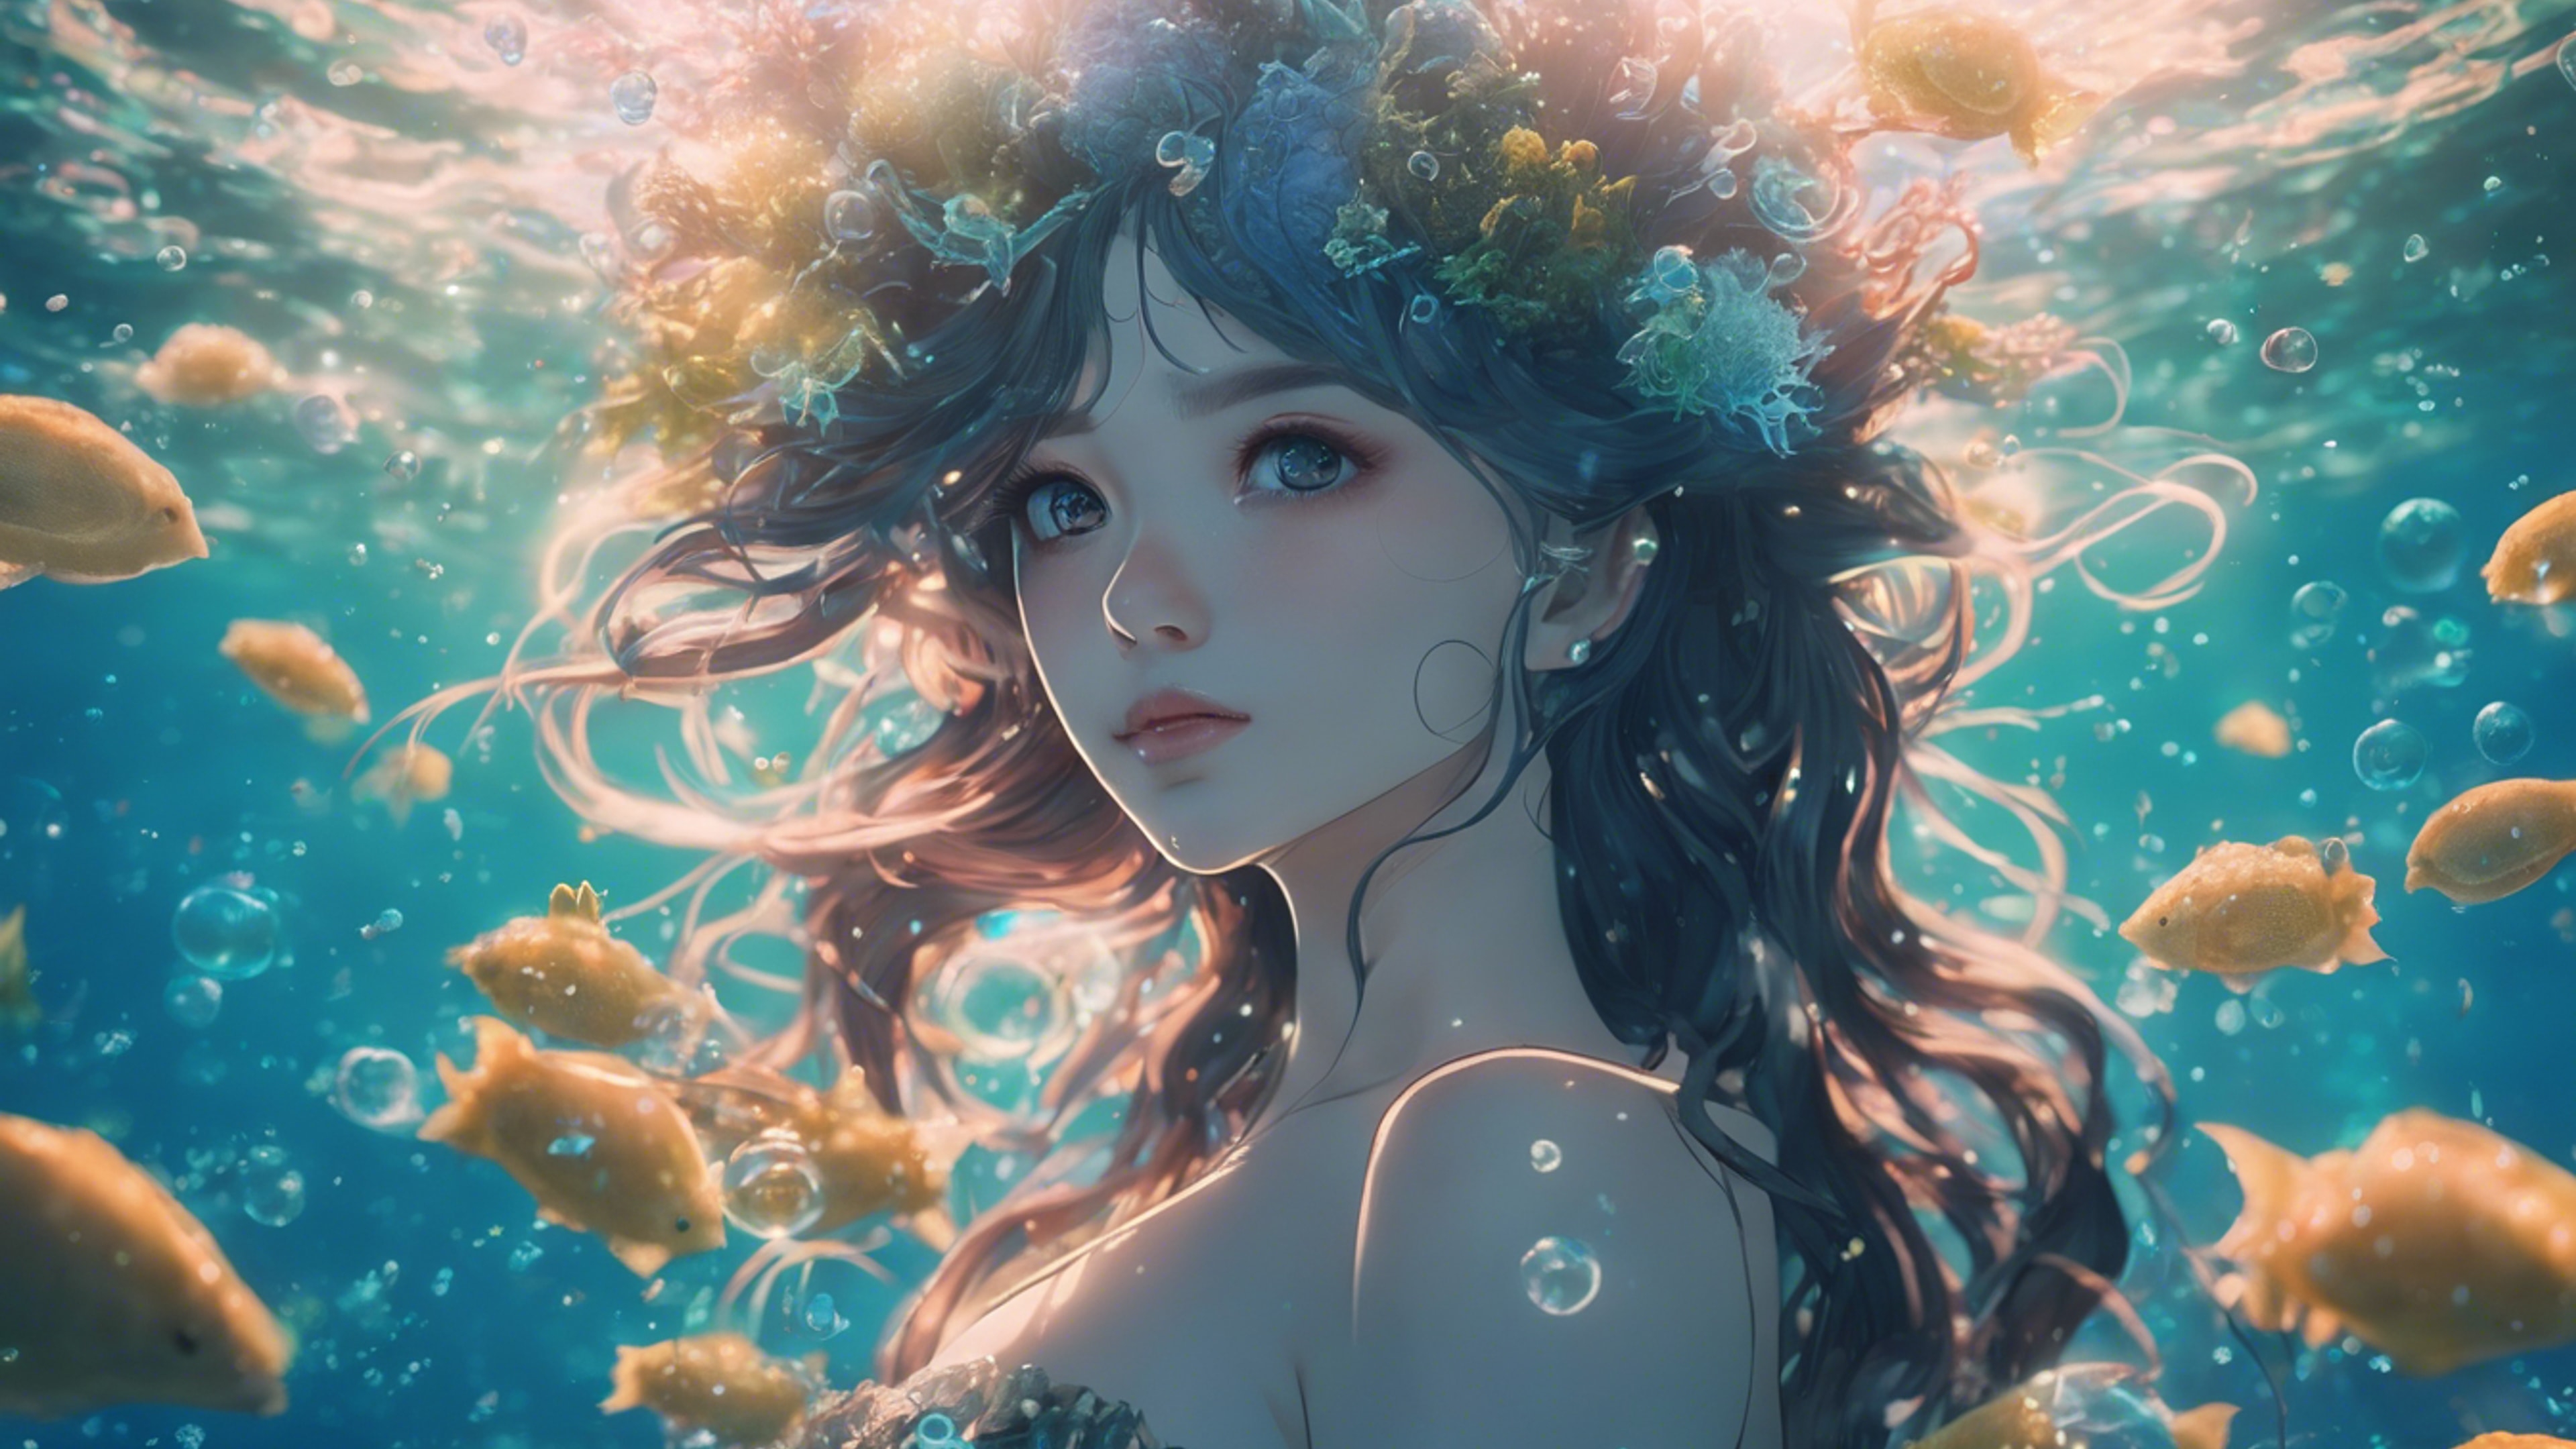 Anime-inspired underwater mermaid kingdom glittering with bioluminescent organisms. Валлпапер[b6d868a85fc94f08be6c]